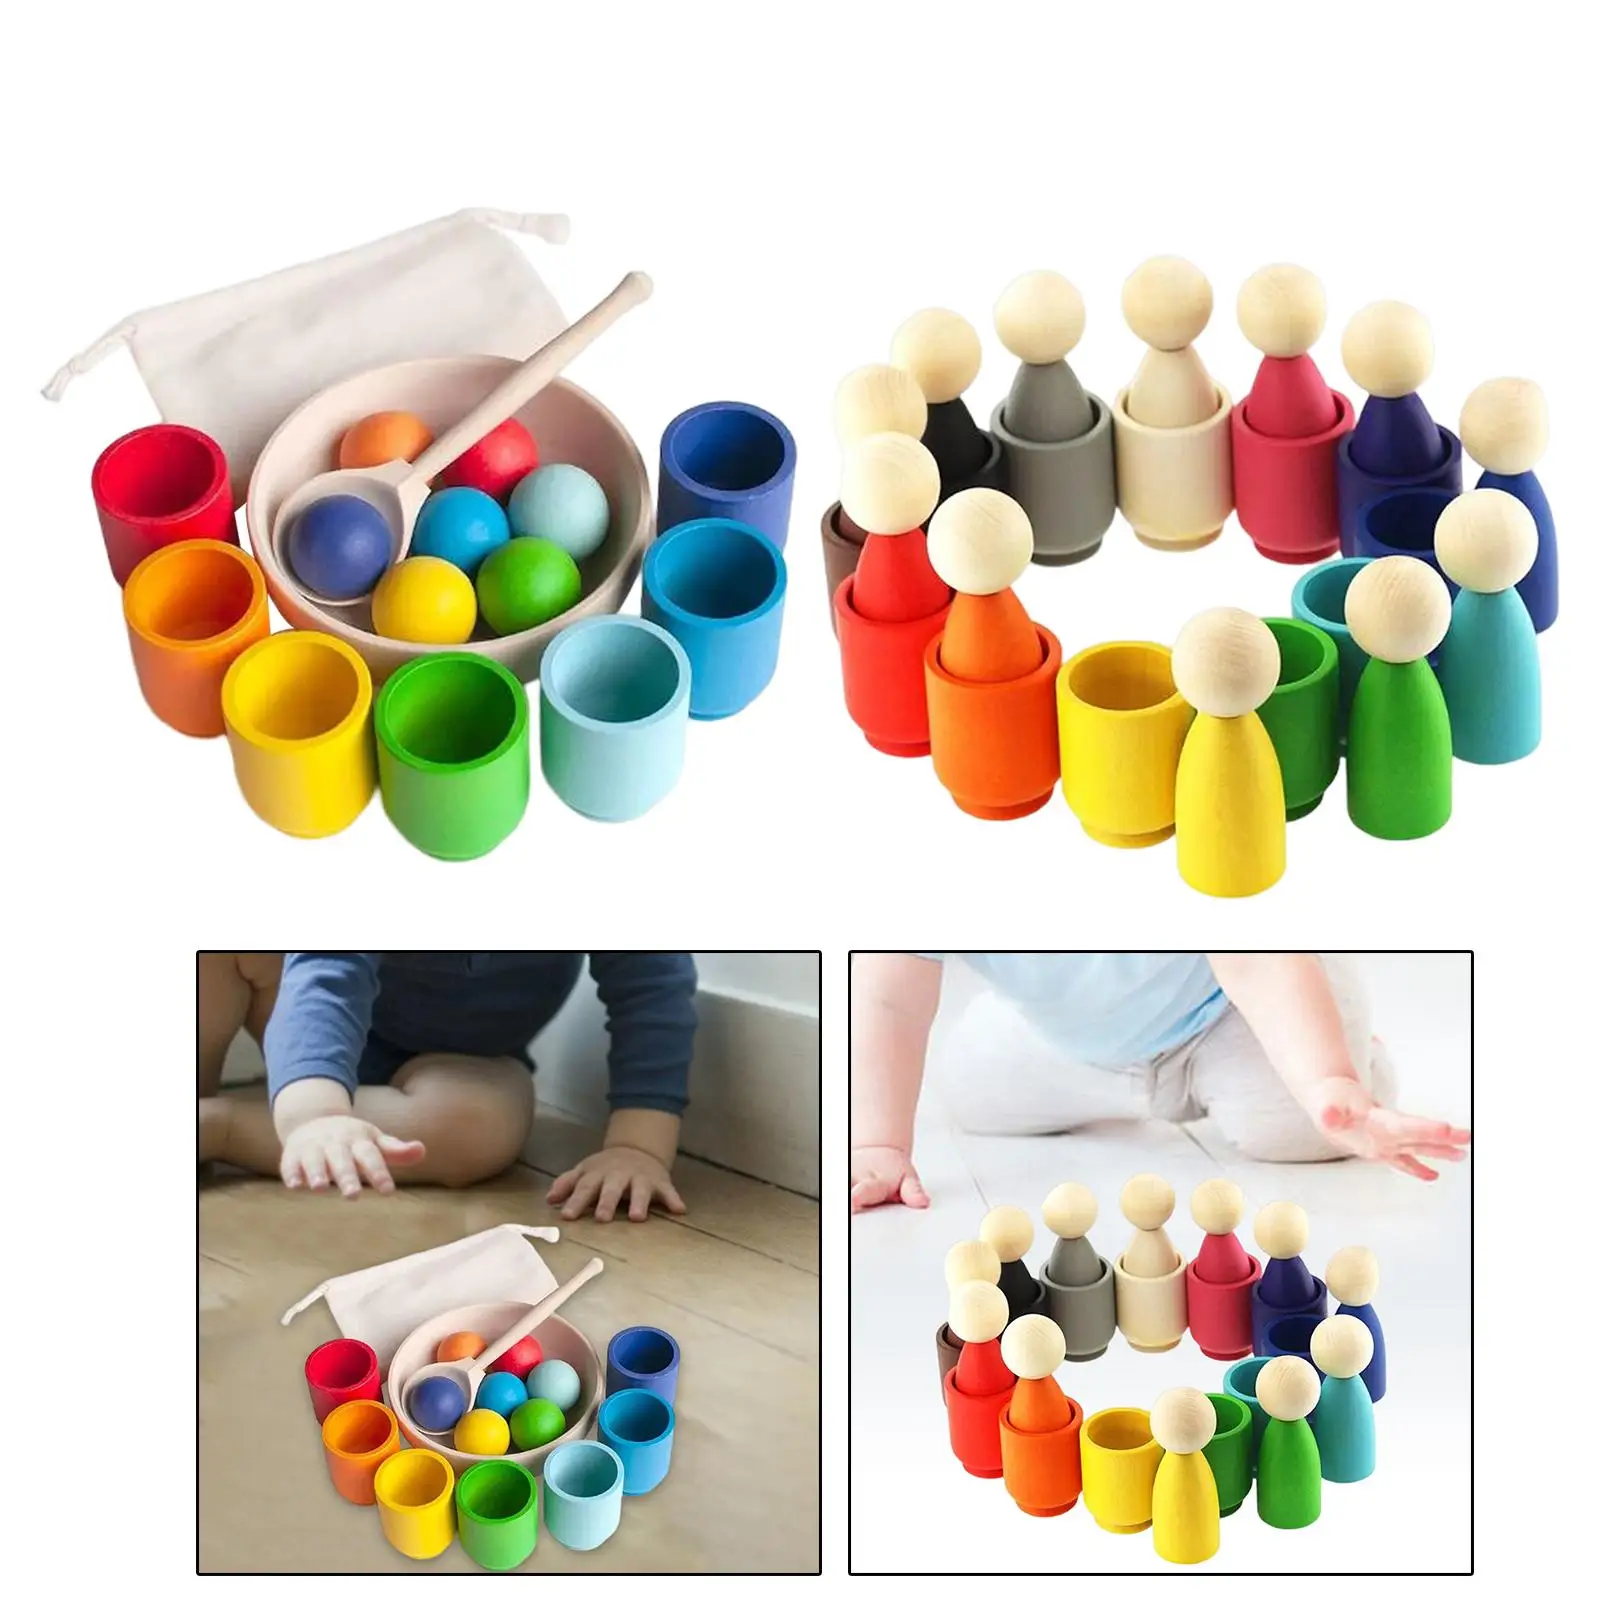 Toddlers Balls in Cups Montessori Toy Sorter Game with Cups and Balls Early Education Toys for 1+ Year Old Boys Girls Children